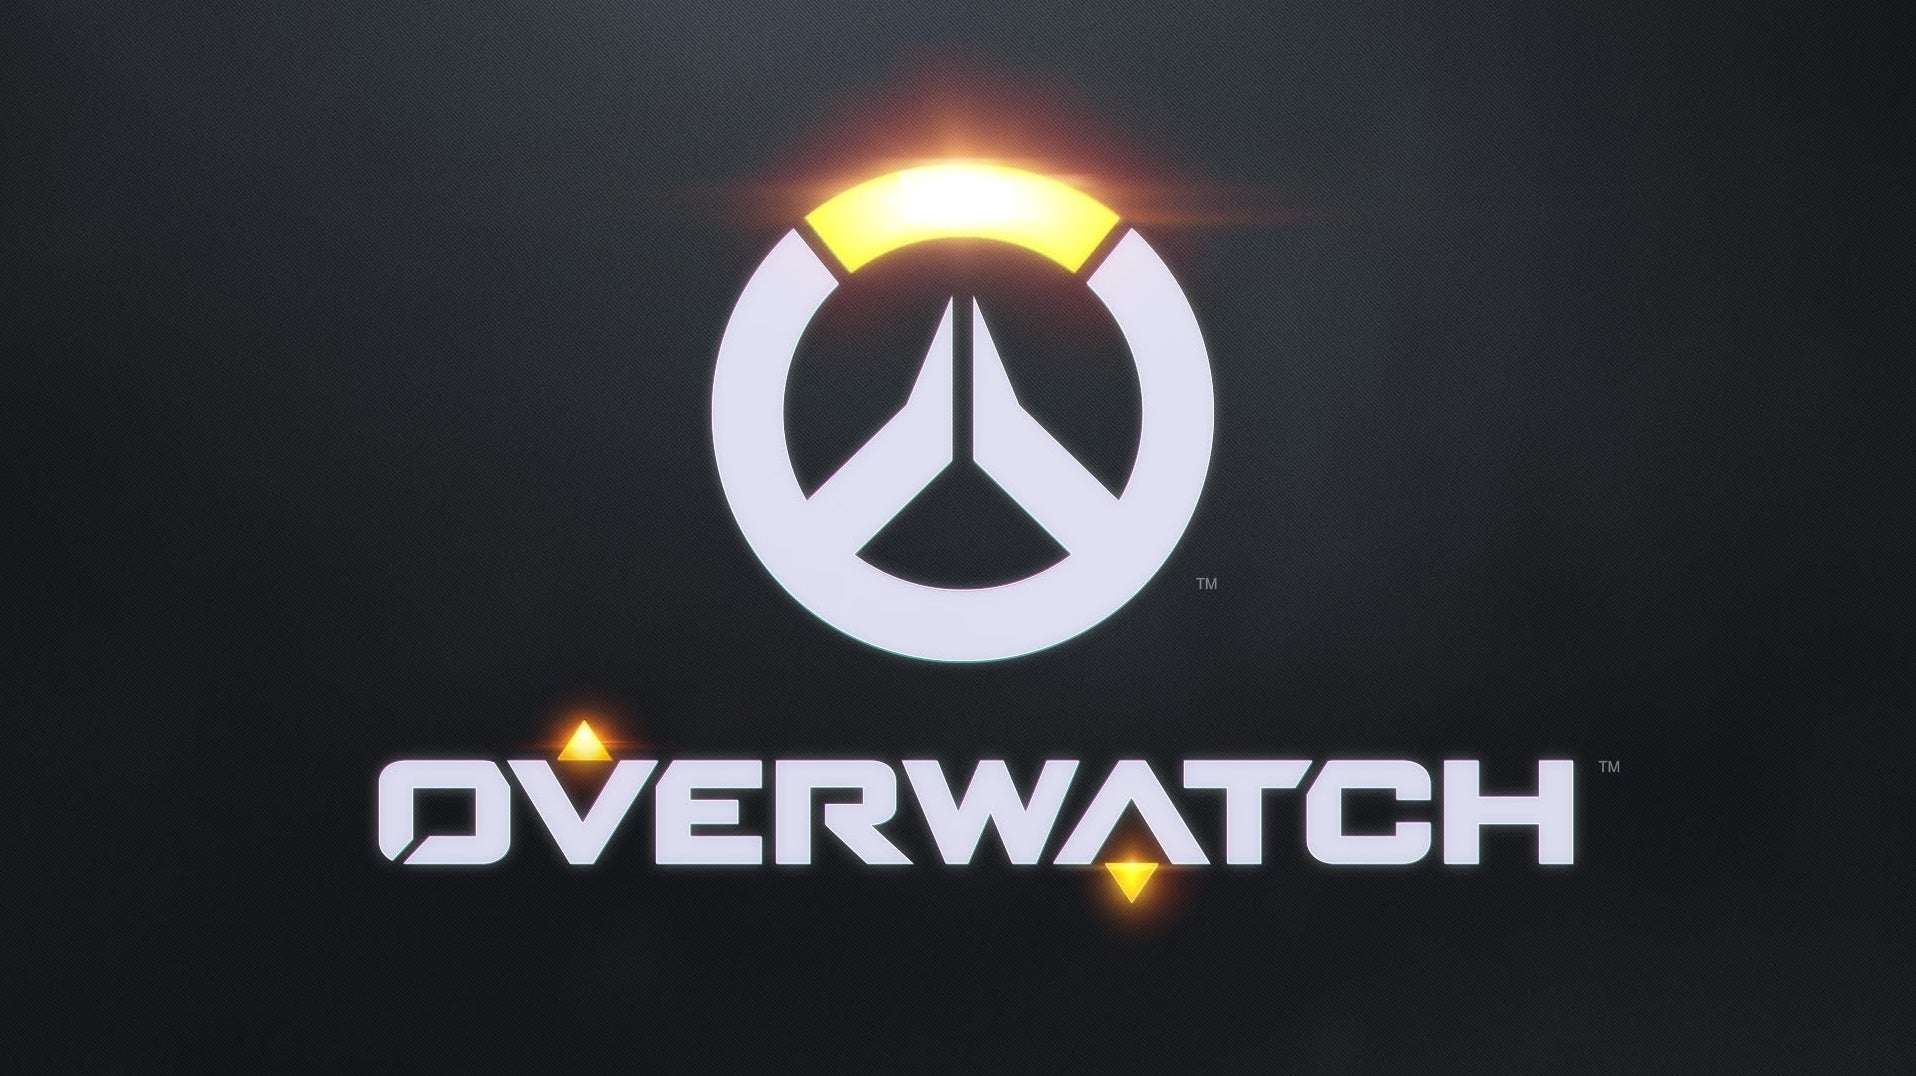 Image for Overwatch executive producer Chacko Sonny leaves Blizzard Entertainment